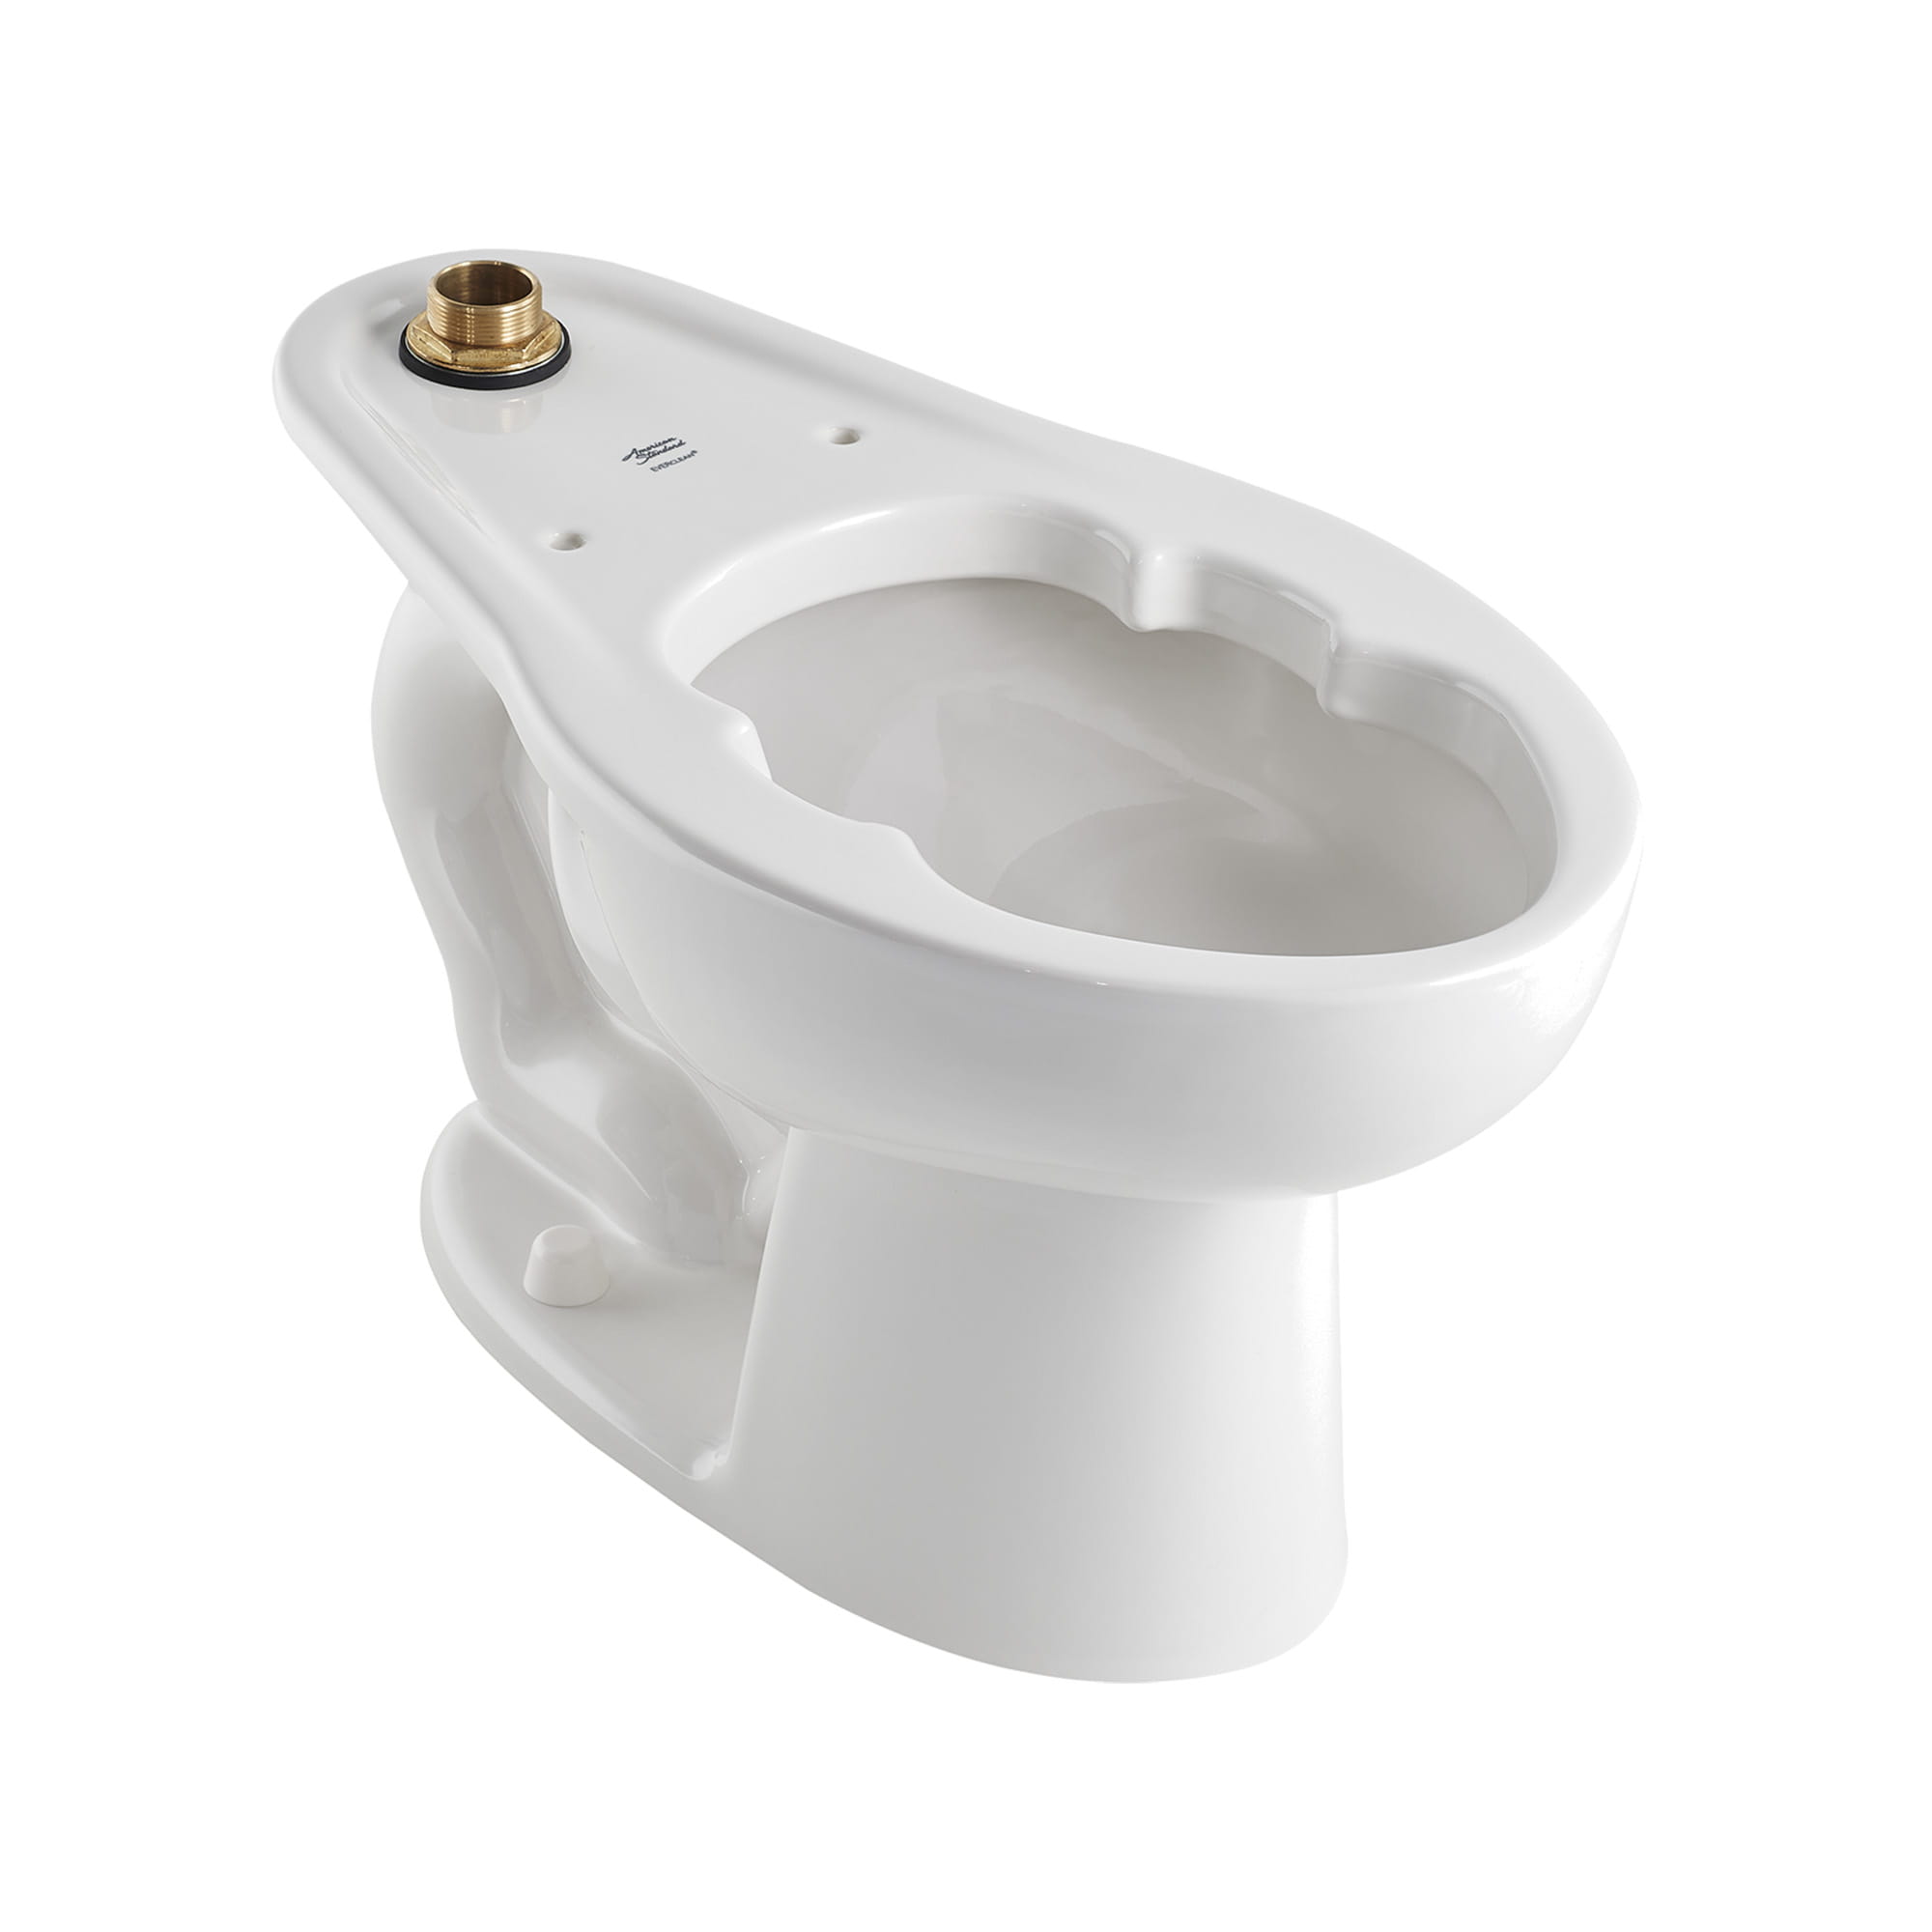 Madera™ 1.1 – 1.6 gpf (4.2 – 6.0 Lpf) 15" Height Top Spud Elongated EverClean® Bowl With Bedpan Lugs